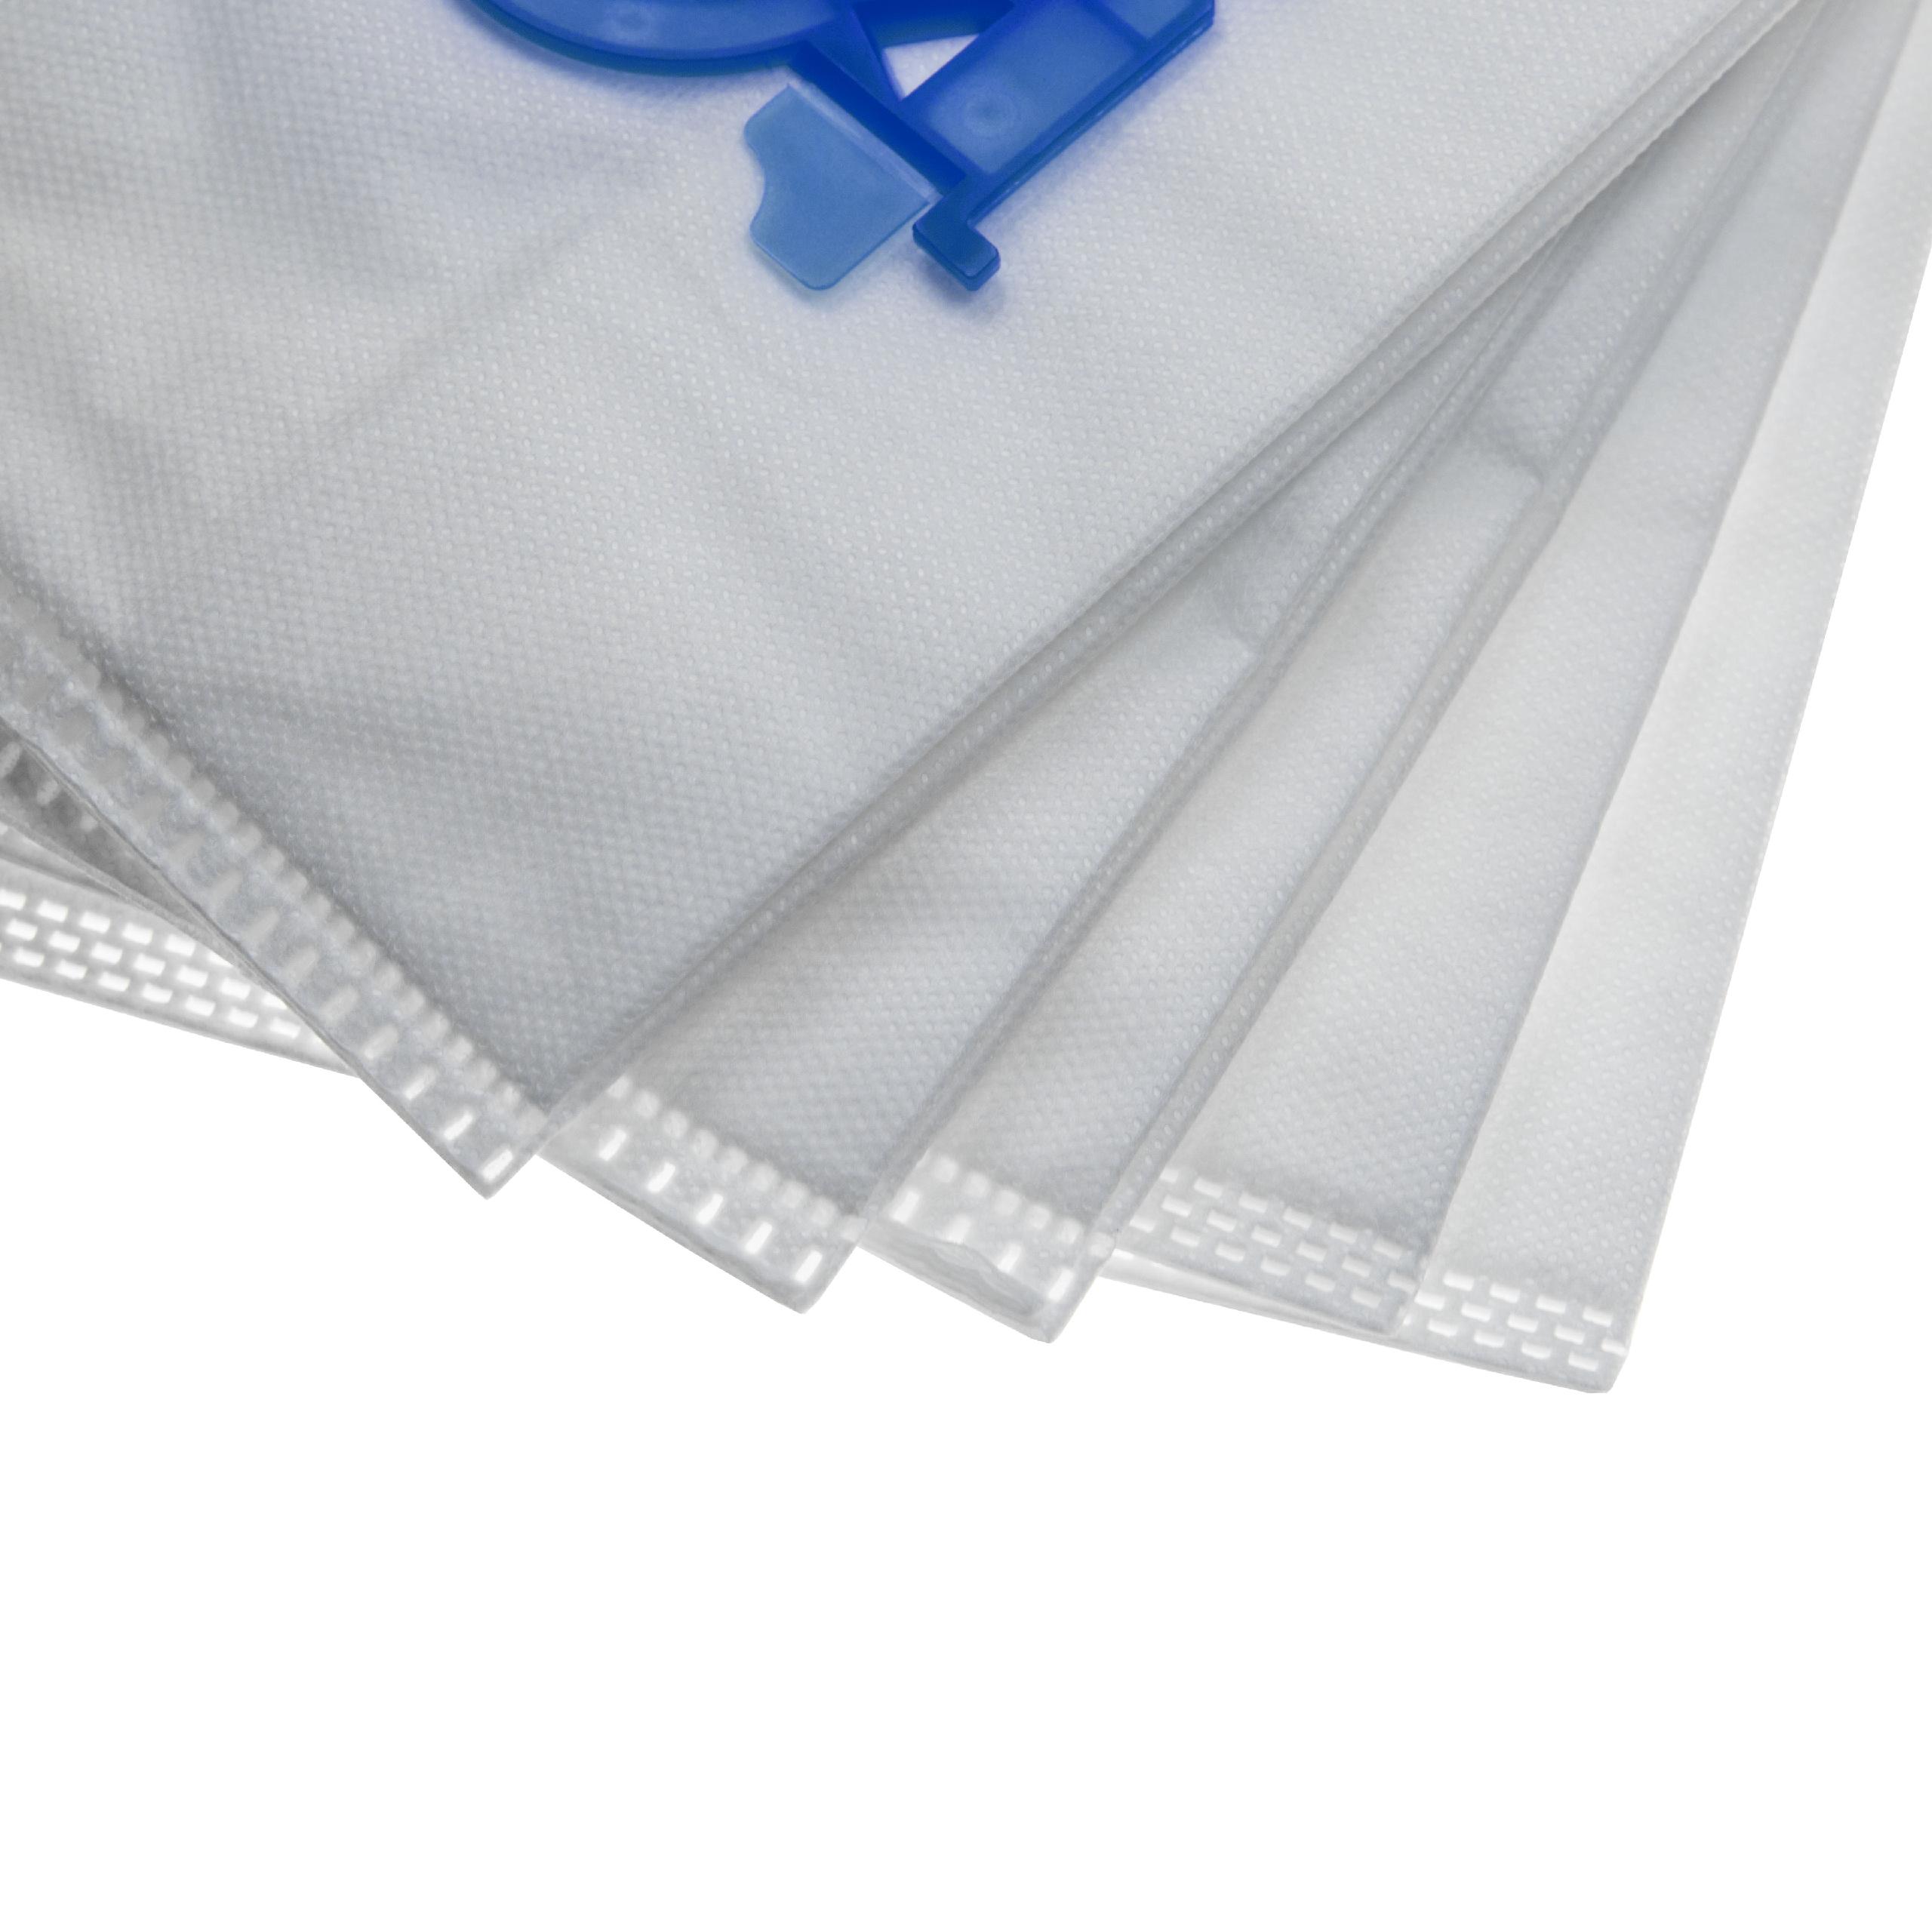 10x Vacuum Cleaner Bag replaces AEG 9001684753, GR203S, 900166039/9 for Philips - microfleece